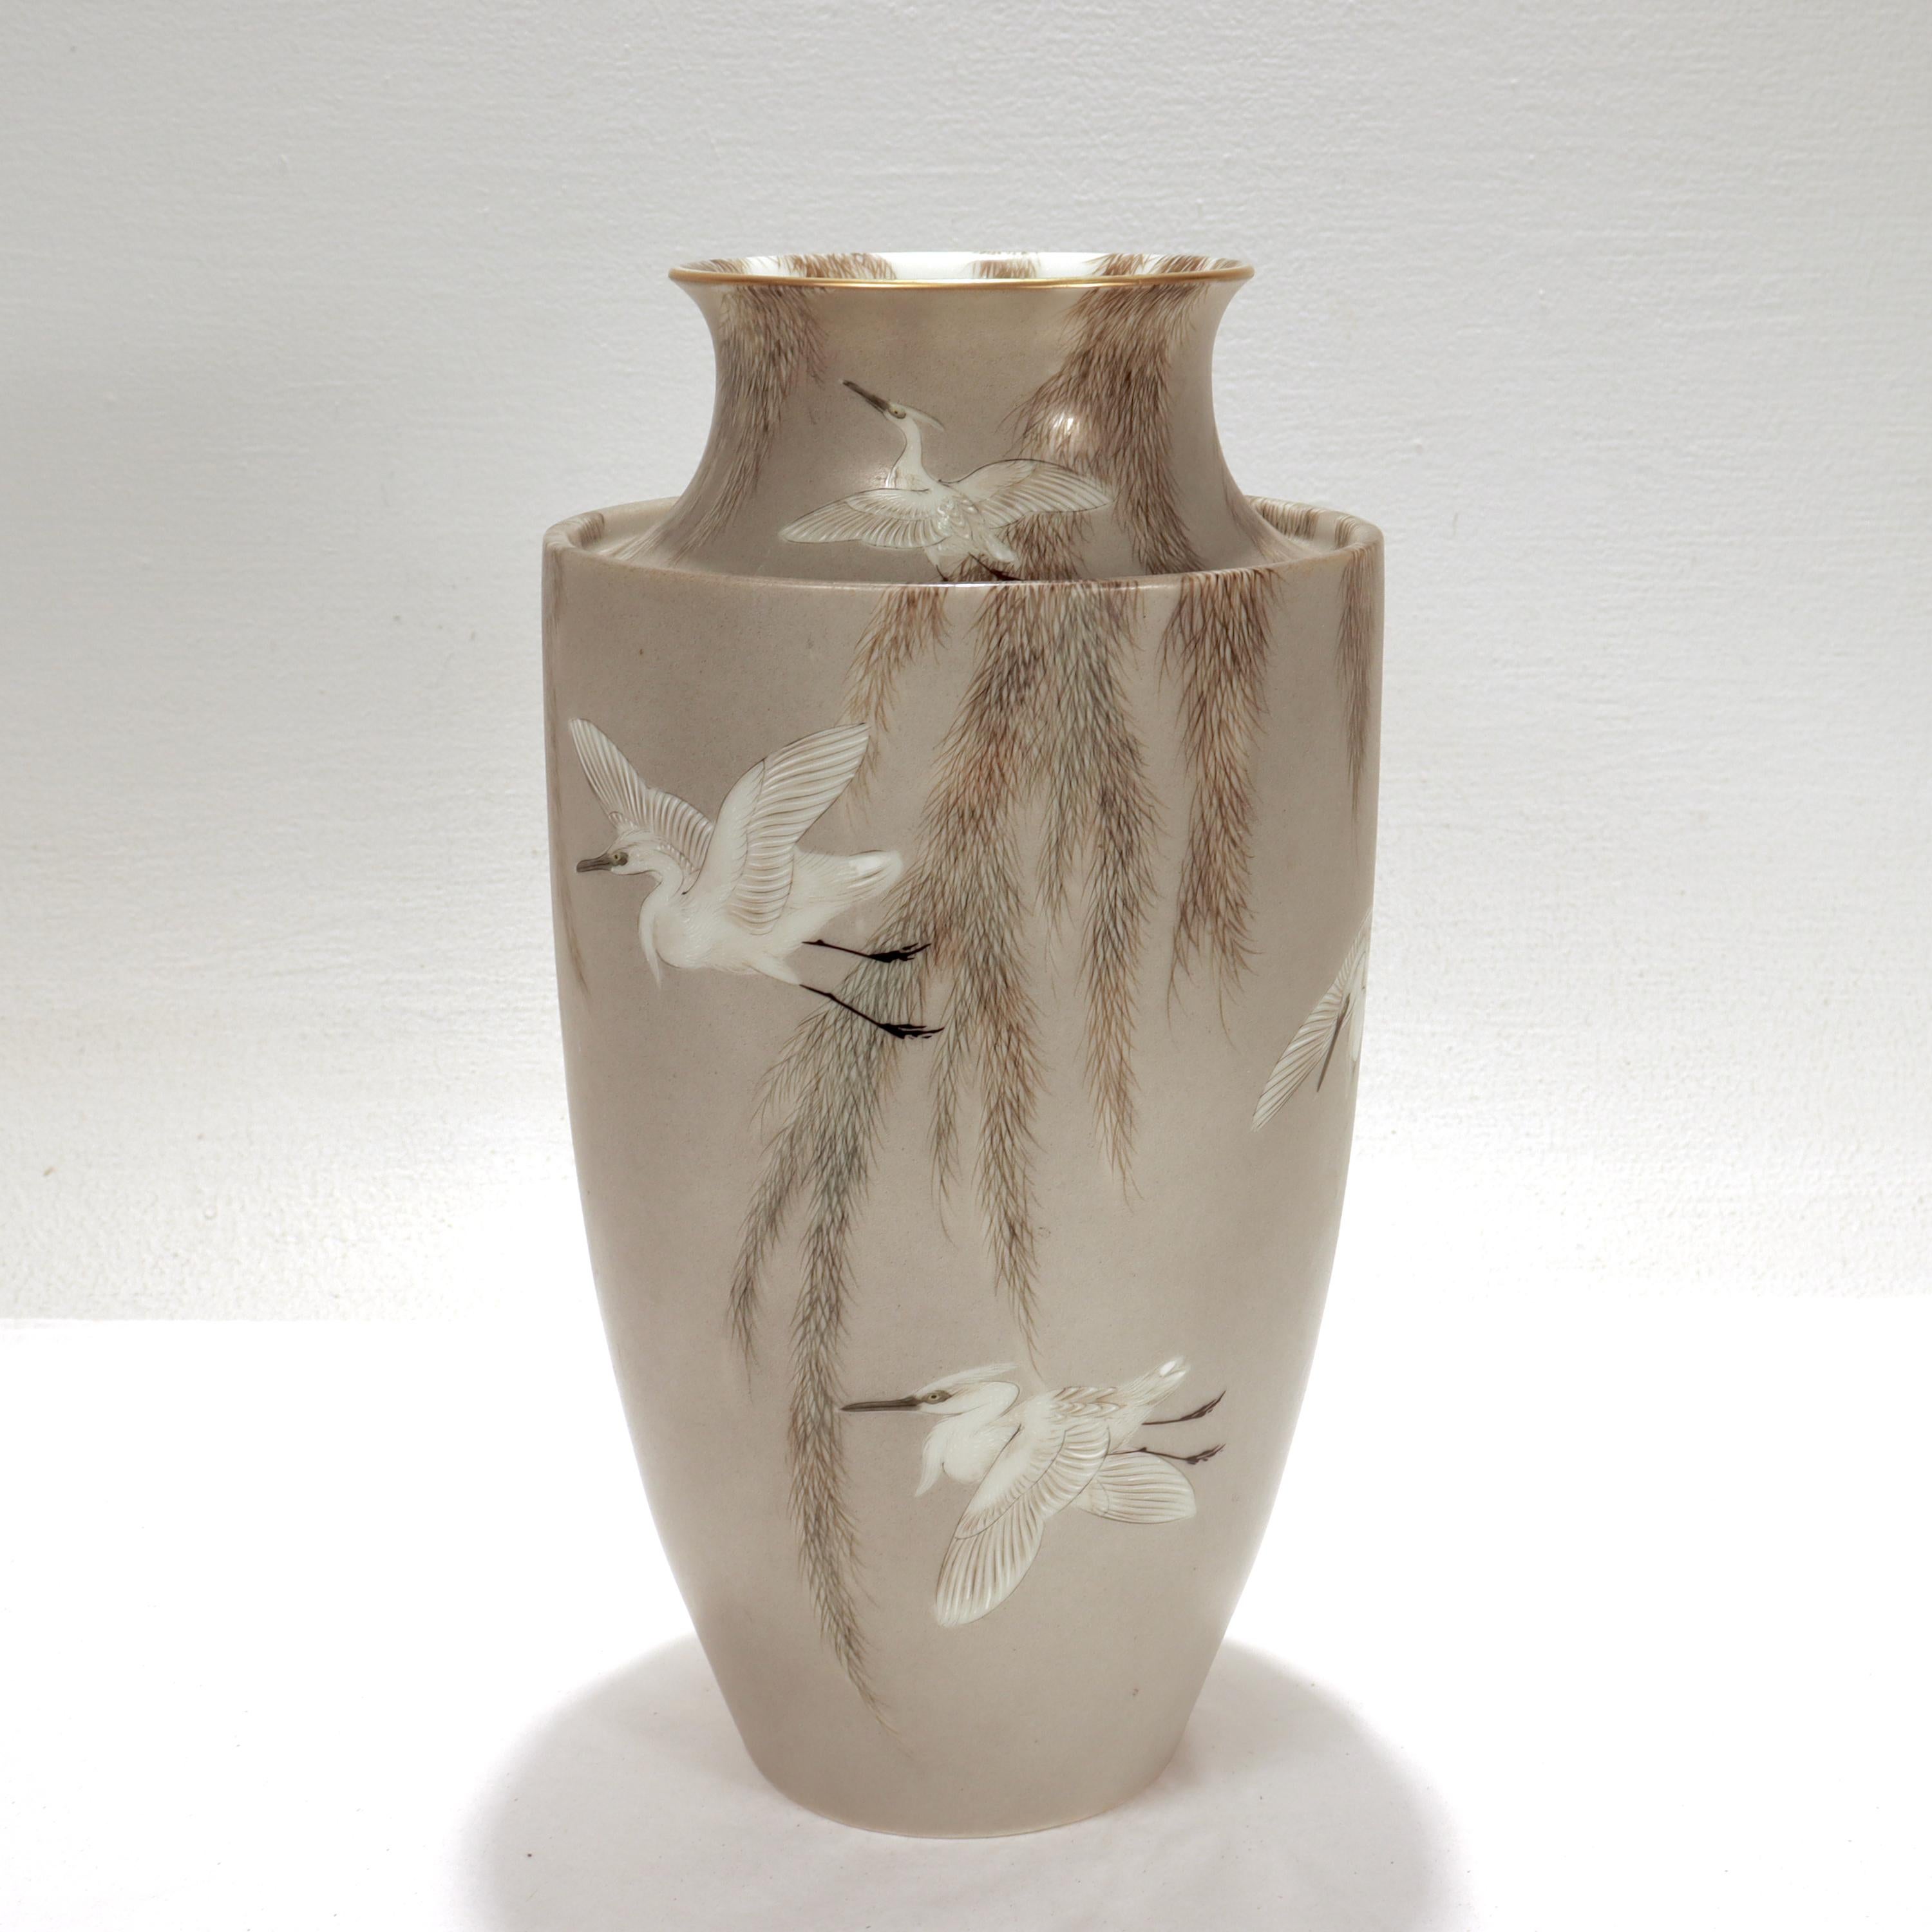 A fine Japanese porcelain vase from the Meiji or Taisho period.

By Imura Hikojiro (?????, b. unknown - d. ca. 1897). 

With a suppressed neck (or everted sidewall), a gilt rim, and tapered sides.

Handpainted with egrets in flight amongst